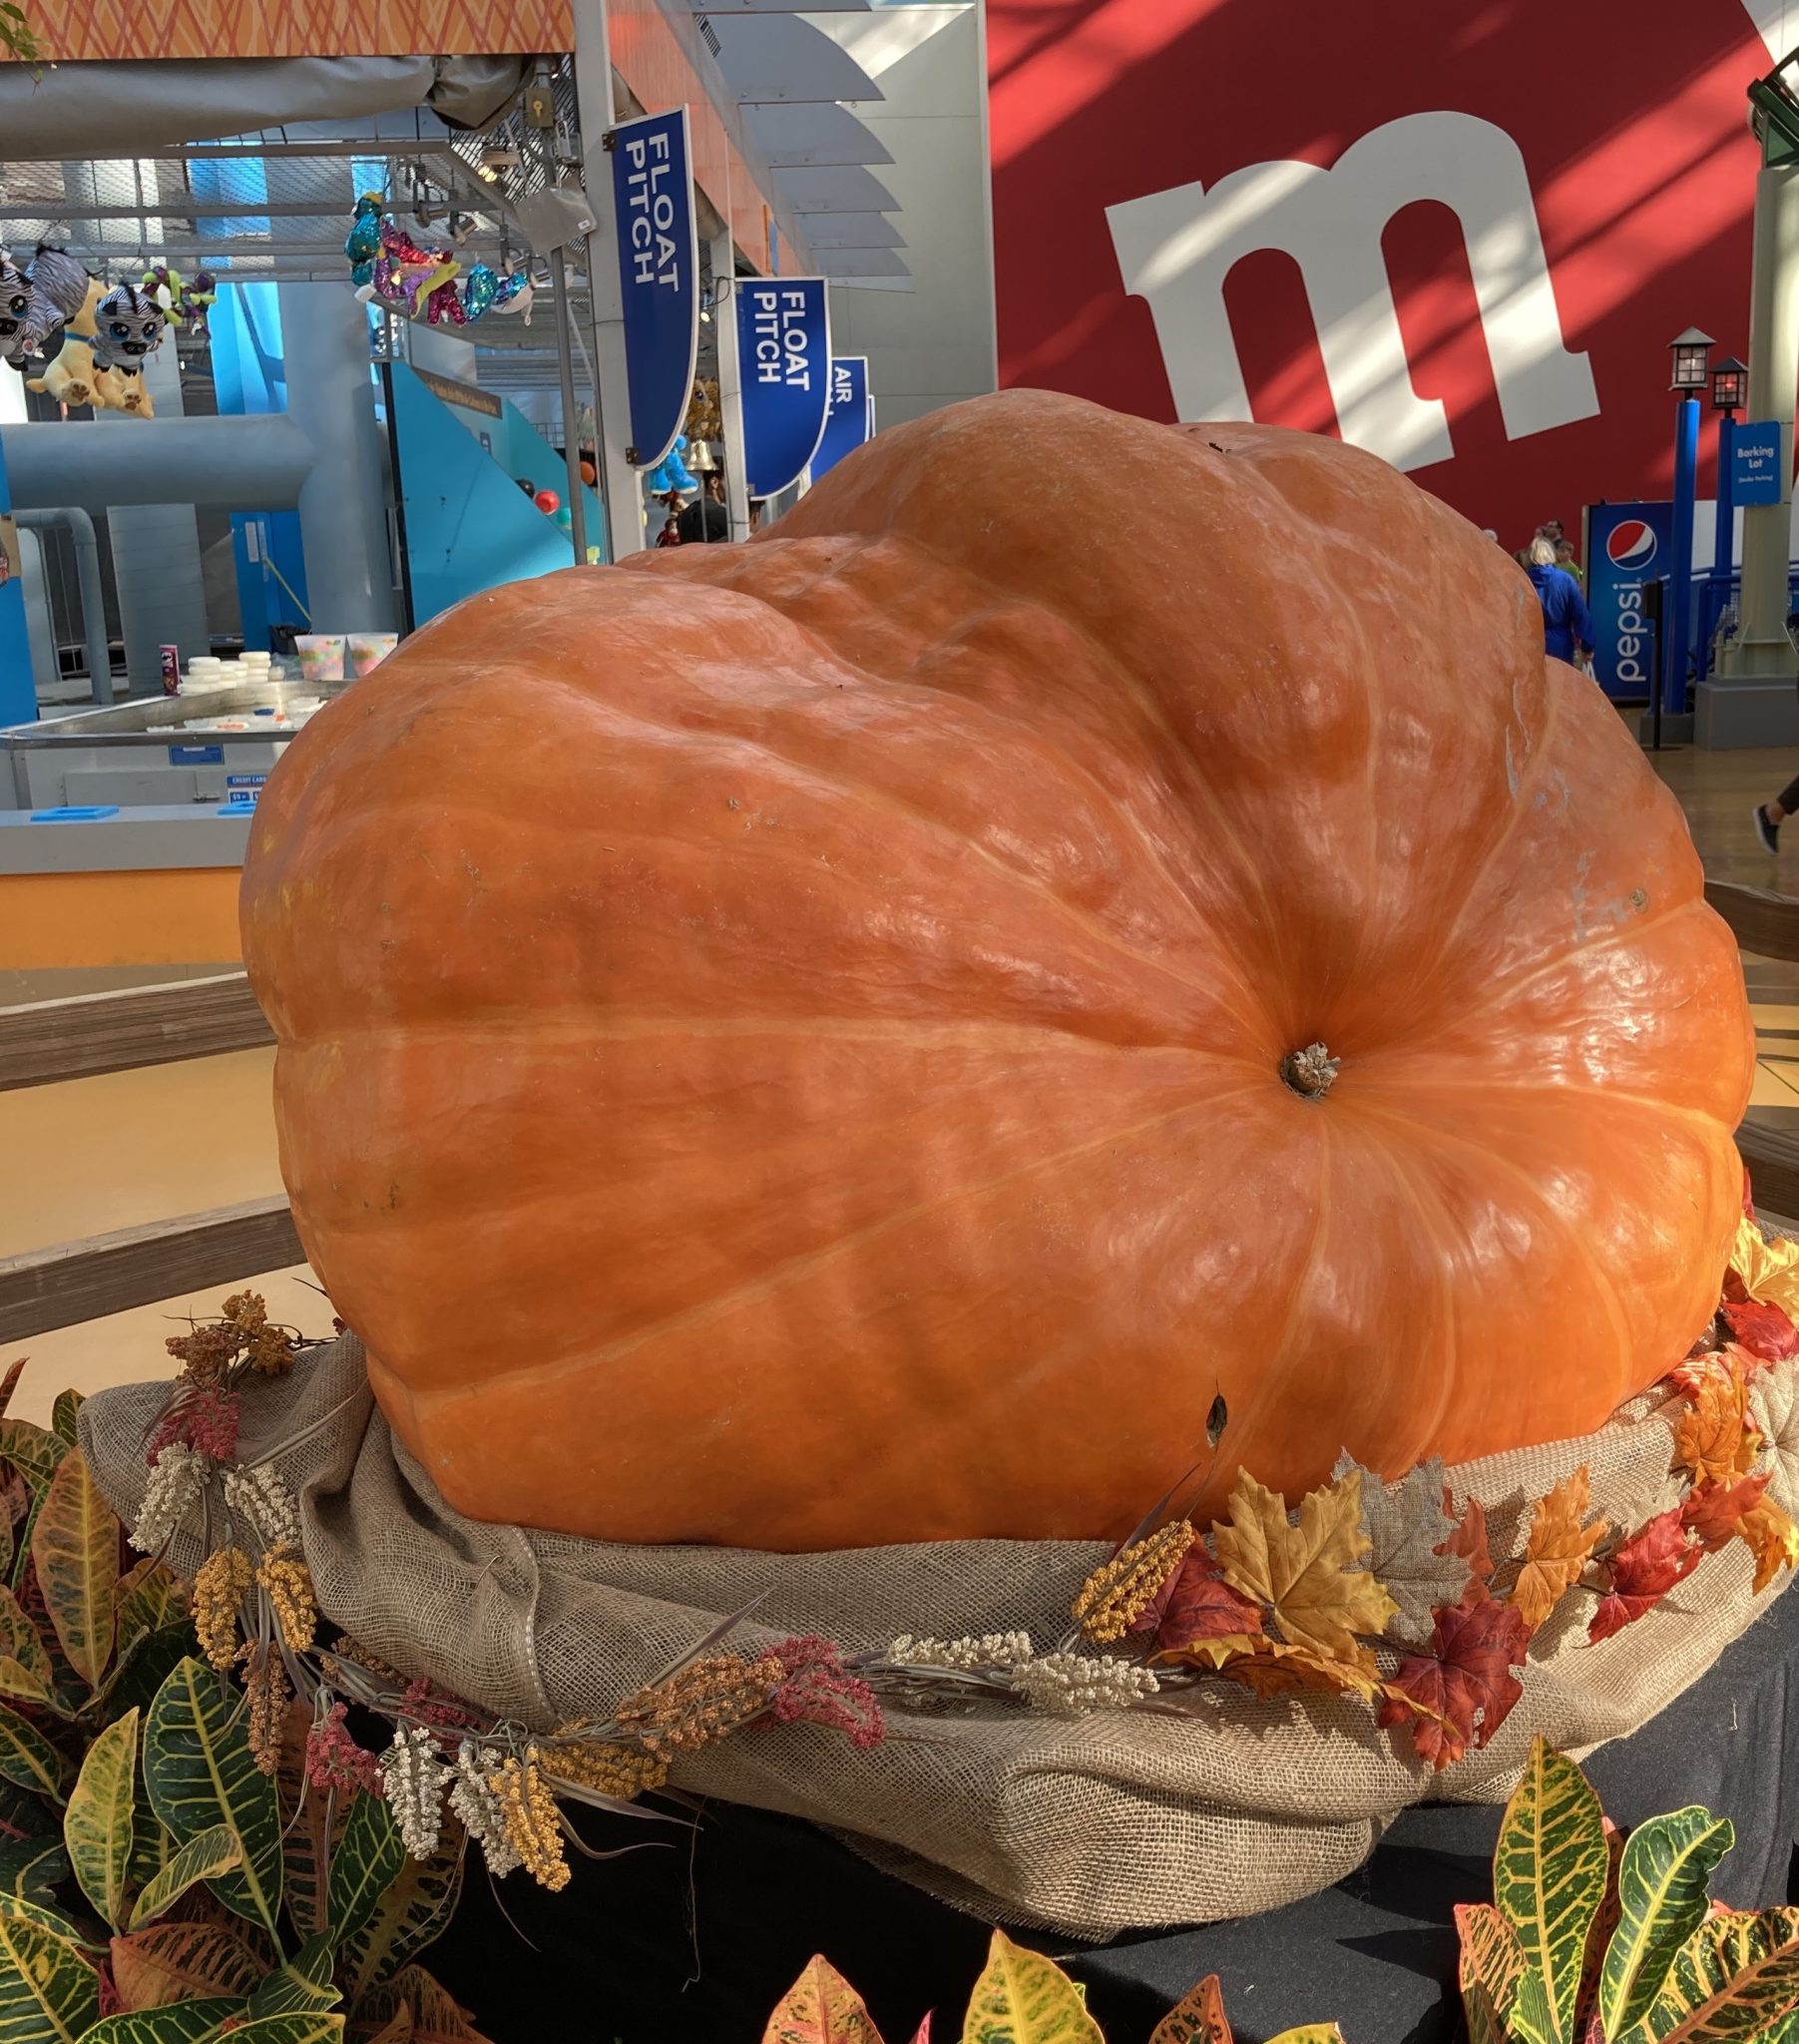 A large pumkin on display at the Mall of America, Twin Cities (MN)